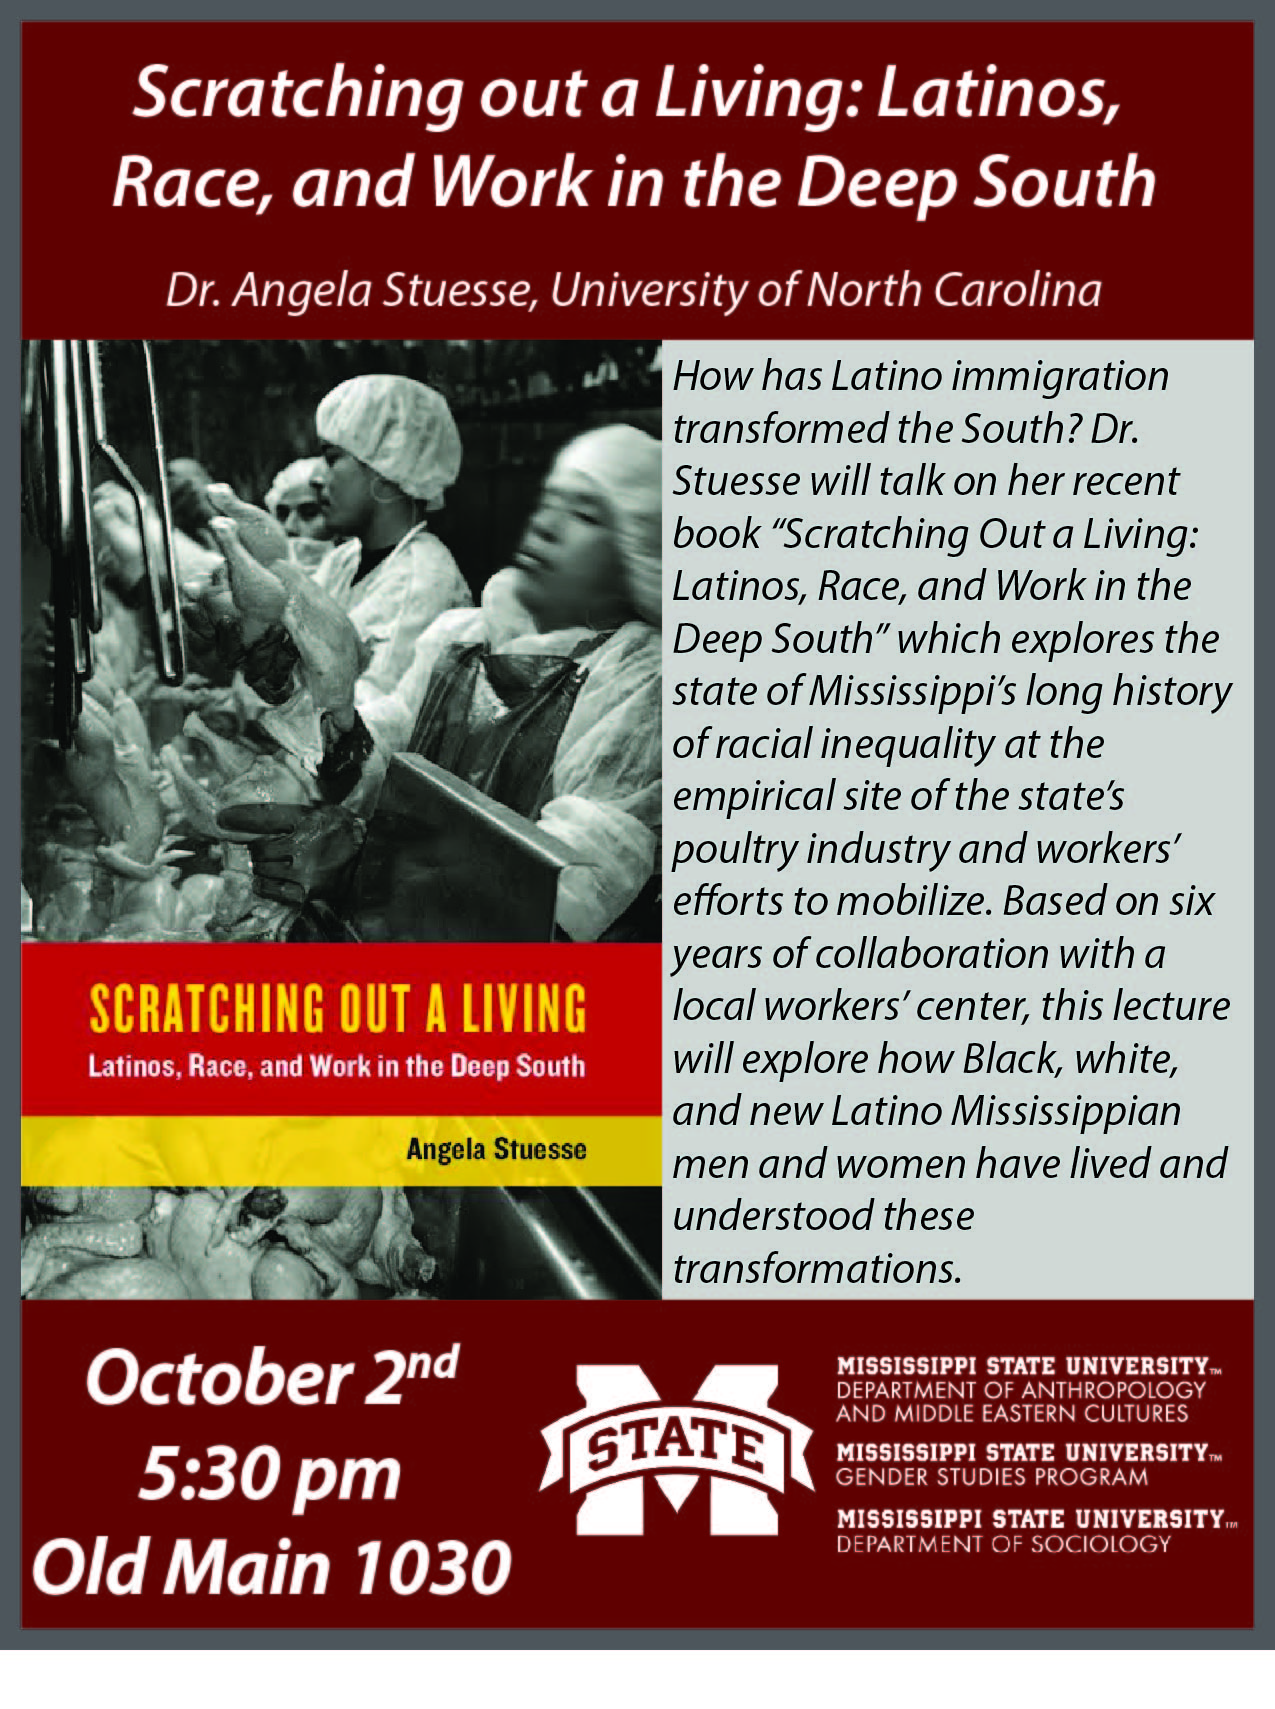 Dr. Angela Stuesse (University of North Carolina) to give talk entitled "Scratching out a Living: Latinos, Race, and Work in the Deep South" Flyer